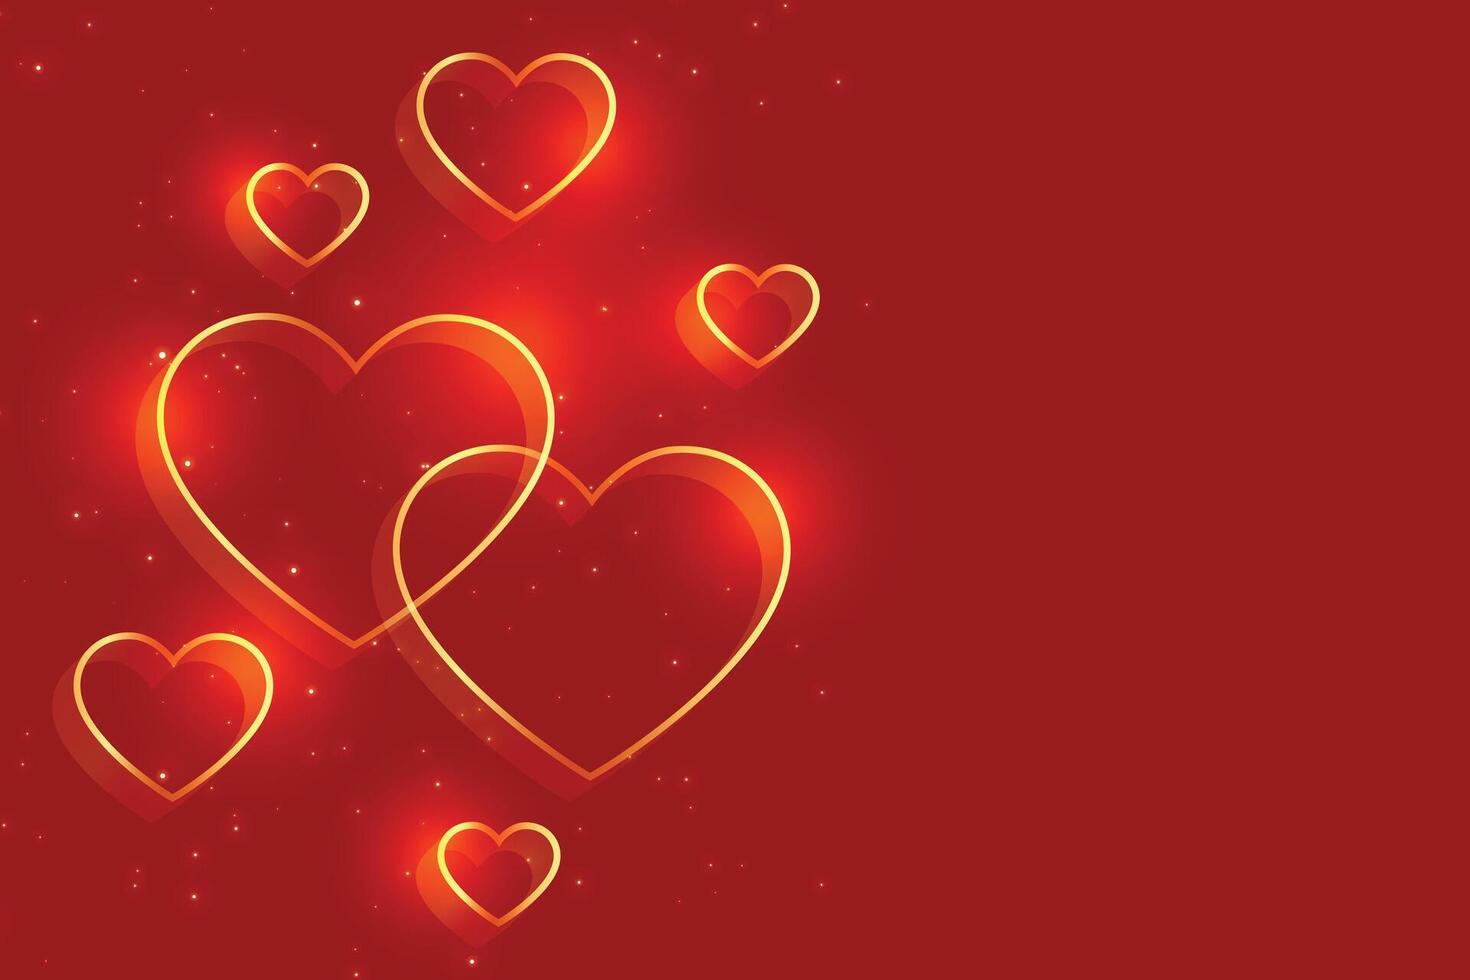 golden hearts on red background for valentines day vector